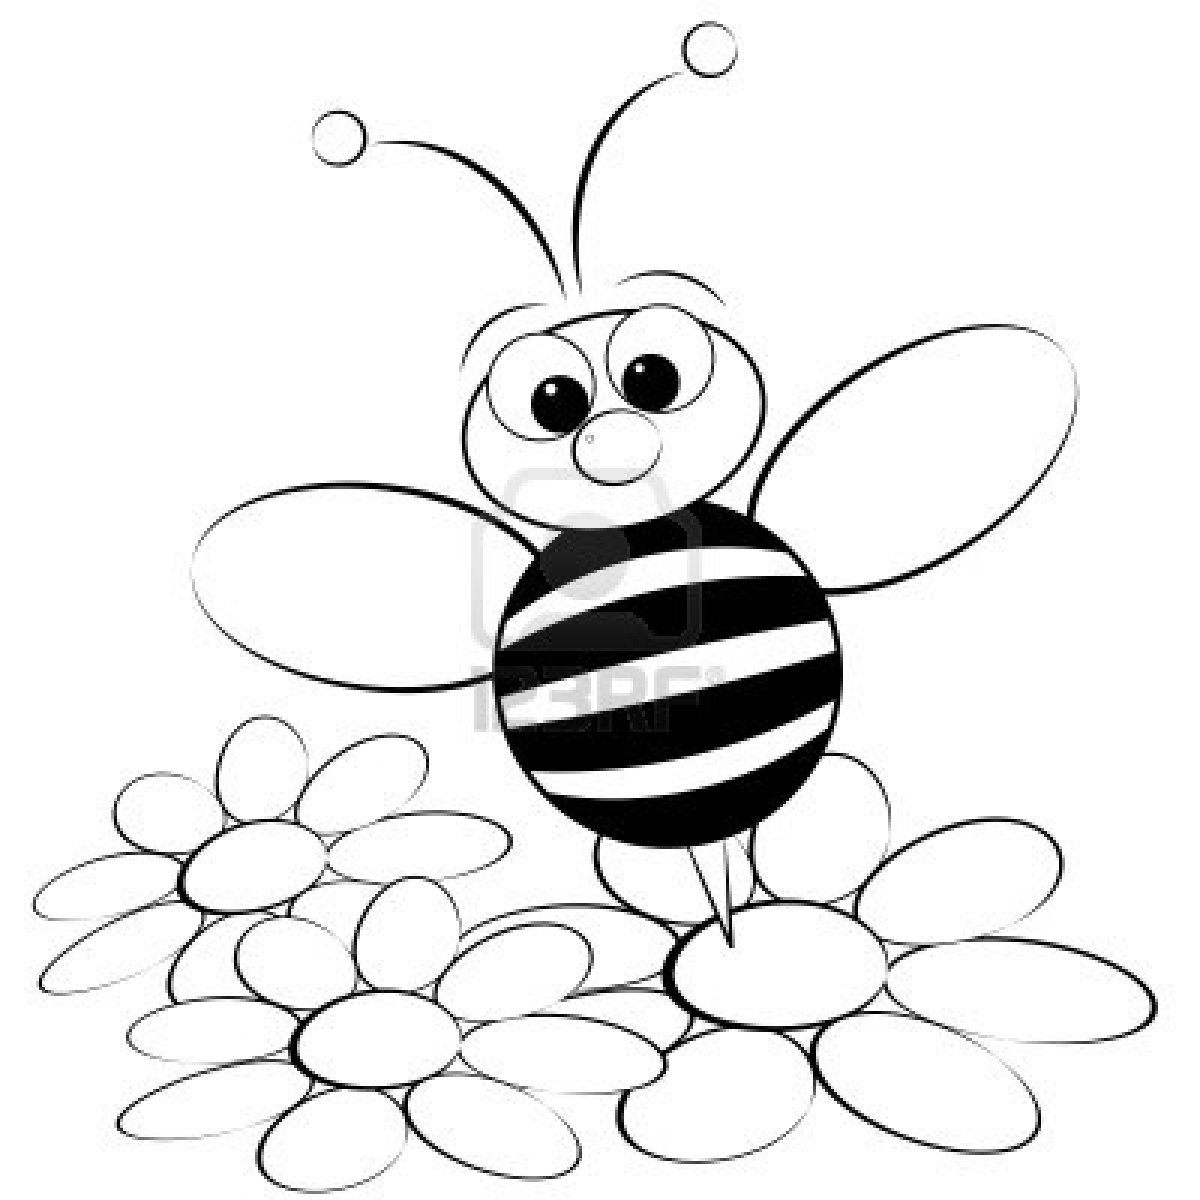 Ant coloring pages for kids - Coloring Pages  Pictures - IMAGIXS